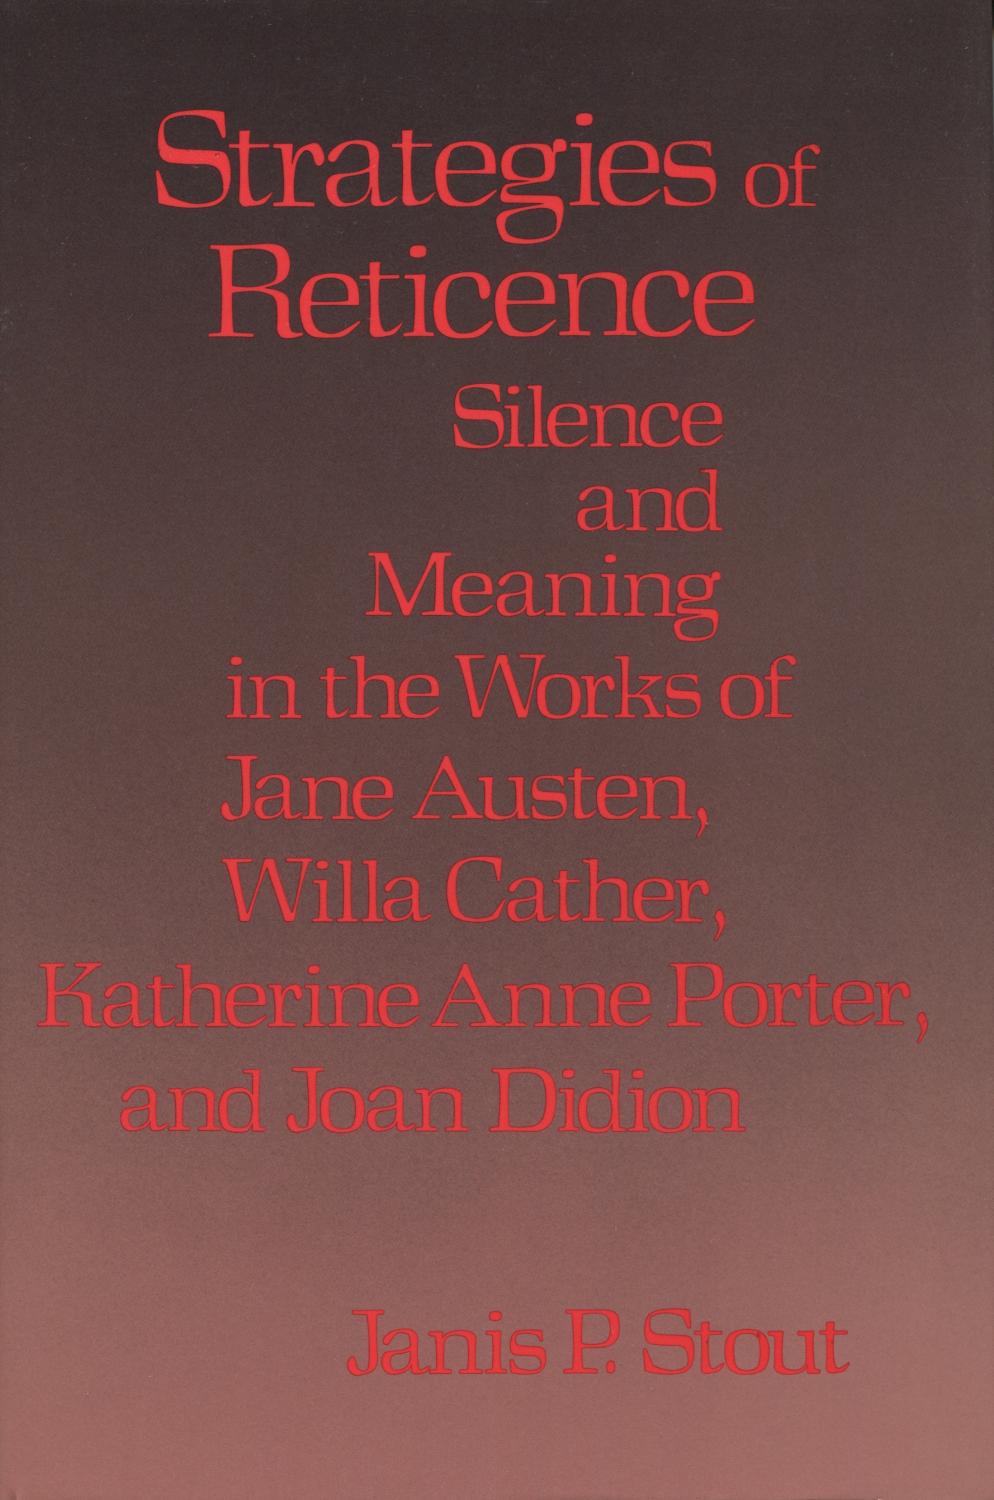 Strategies of Reticence: Silence and Meaning in the Works of Jane Austen, Willa Cather, Katherine Ann Porter and Joan Didion - Stout, Janis P.